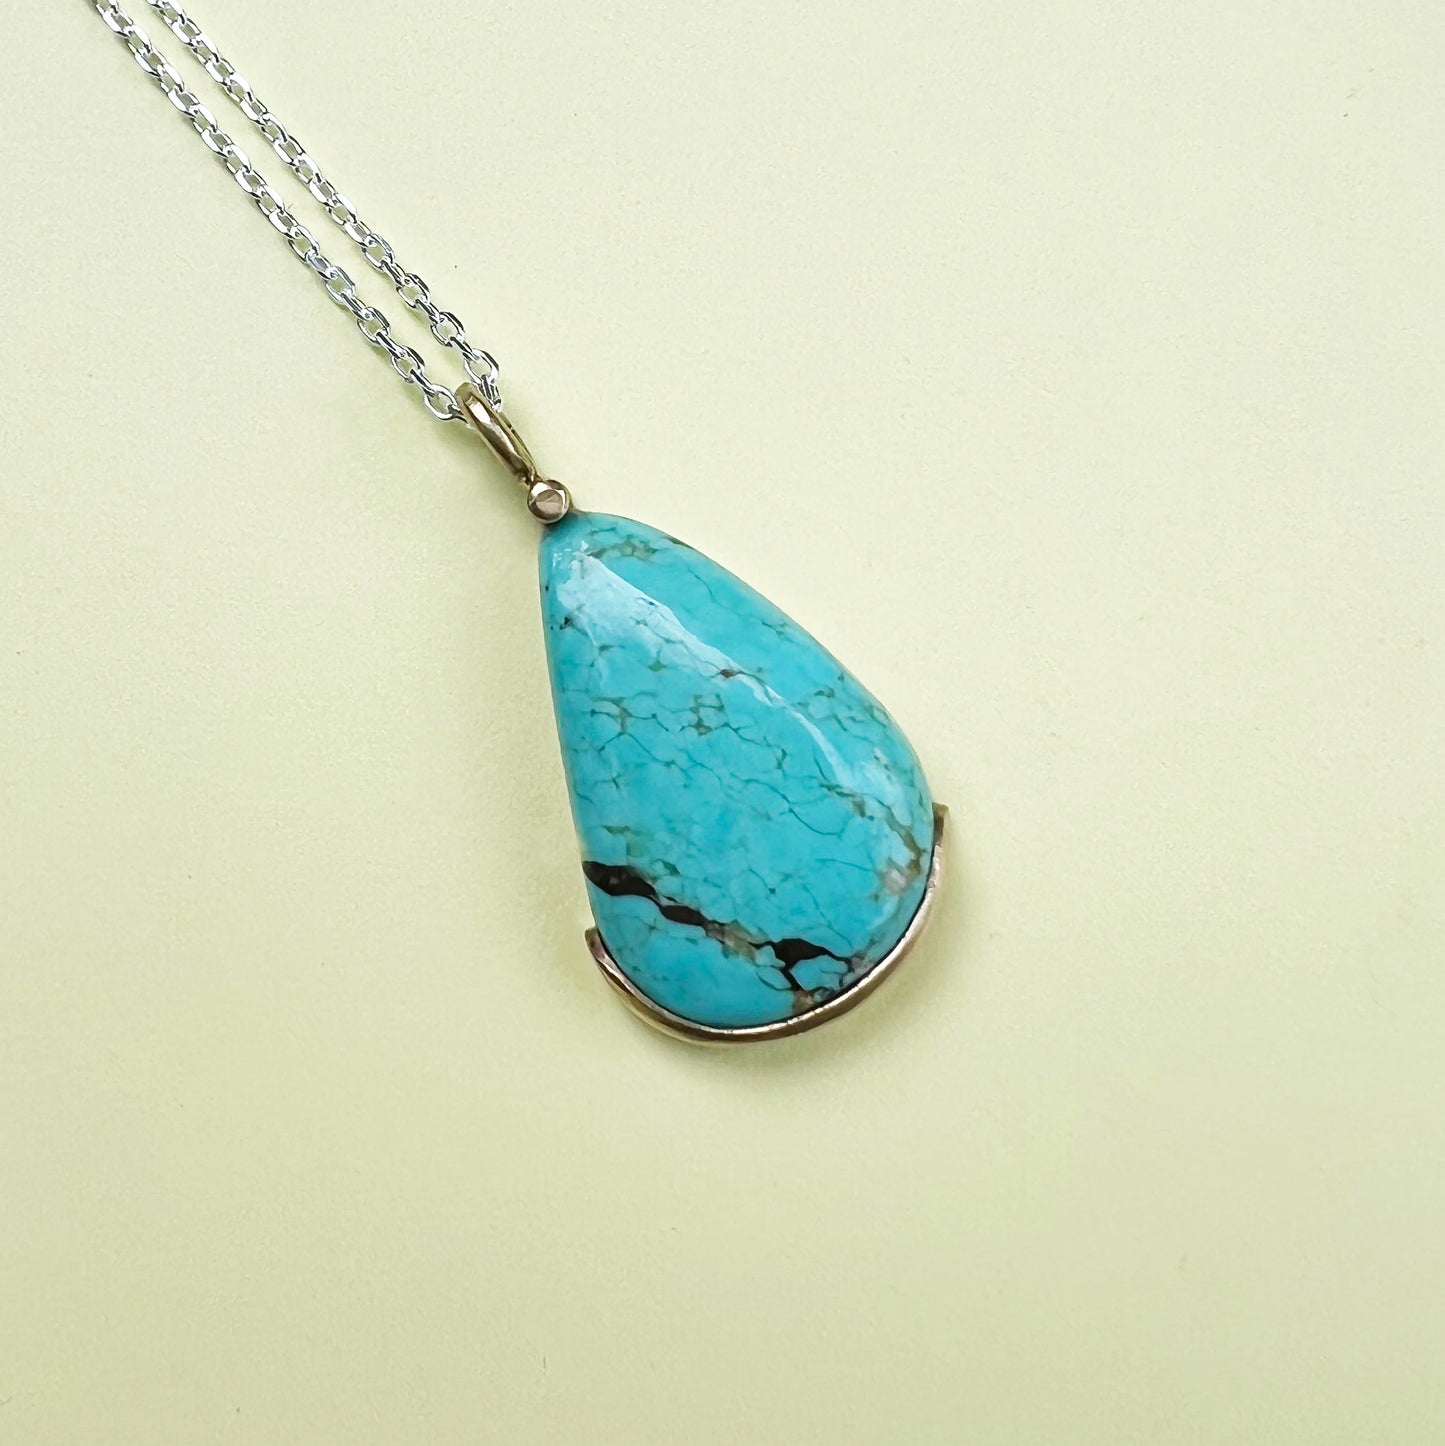 18ct gold & Turquoise necklace, Turquoise pendant, turquoise necklace, gold necklace, sterling silver chain, handmade jewellery, 18ct gold, gemstone necklace